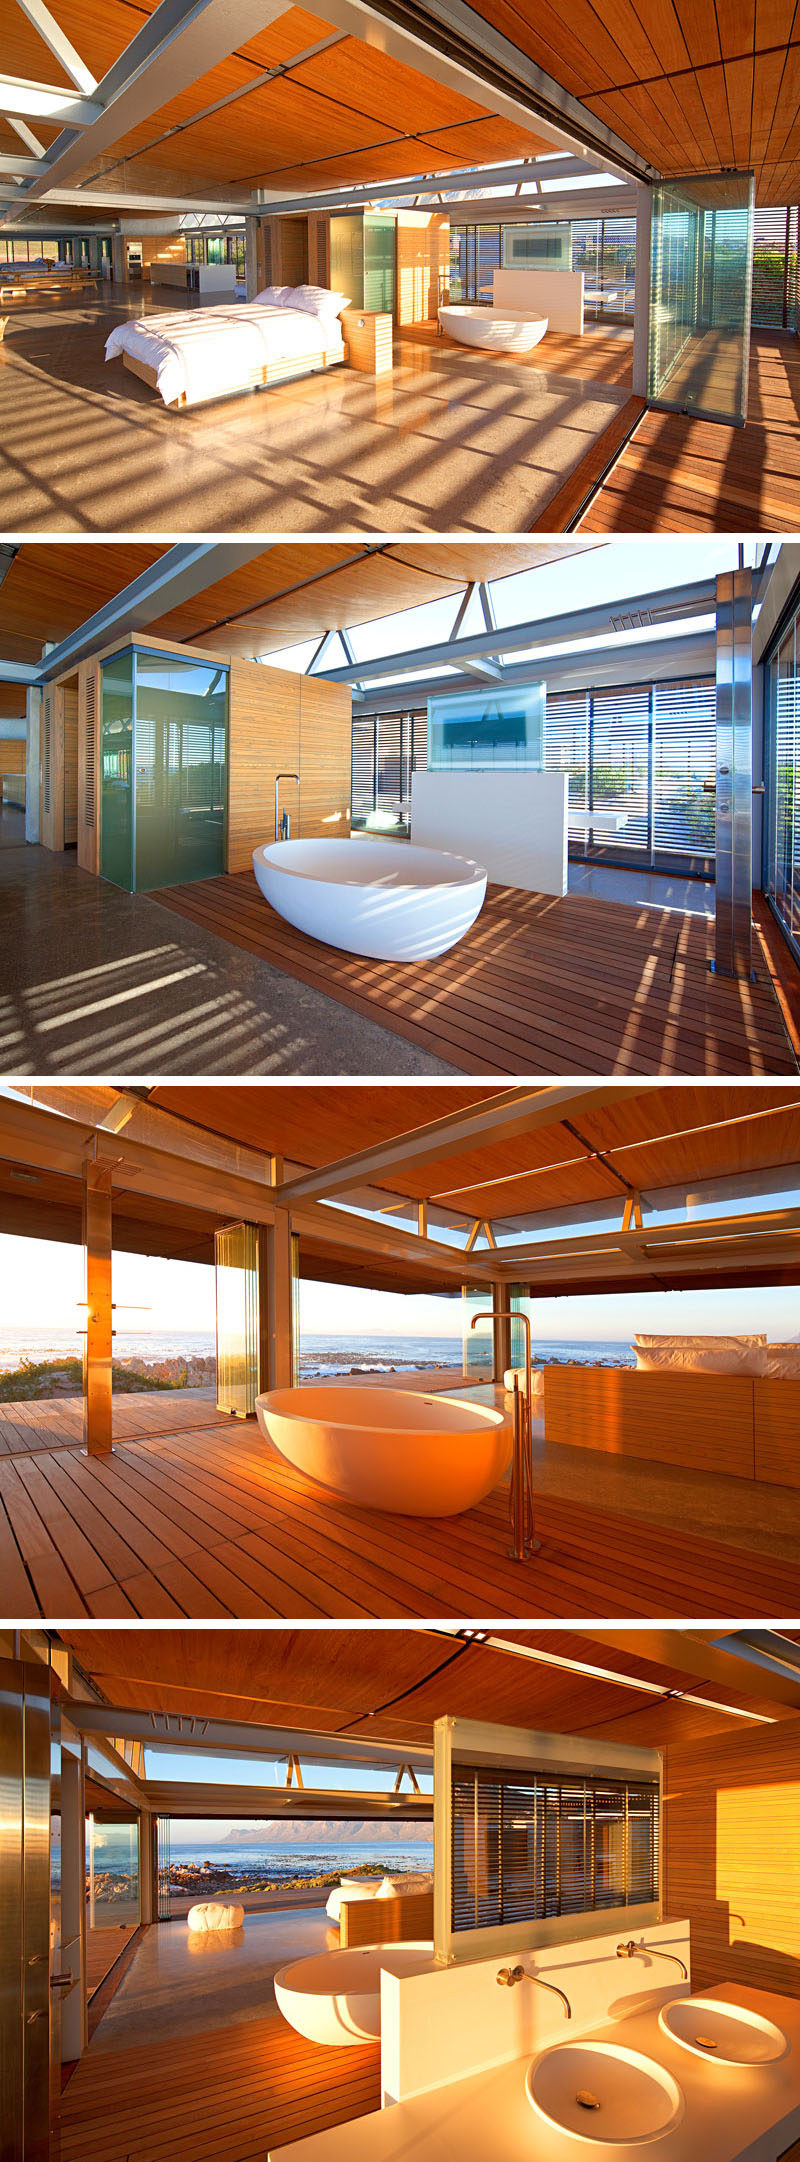 This master suite has a soaker tub positioned behind the bed to take full advantage of the ocean views.